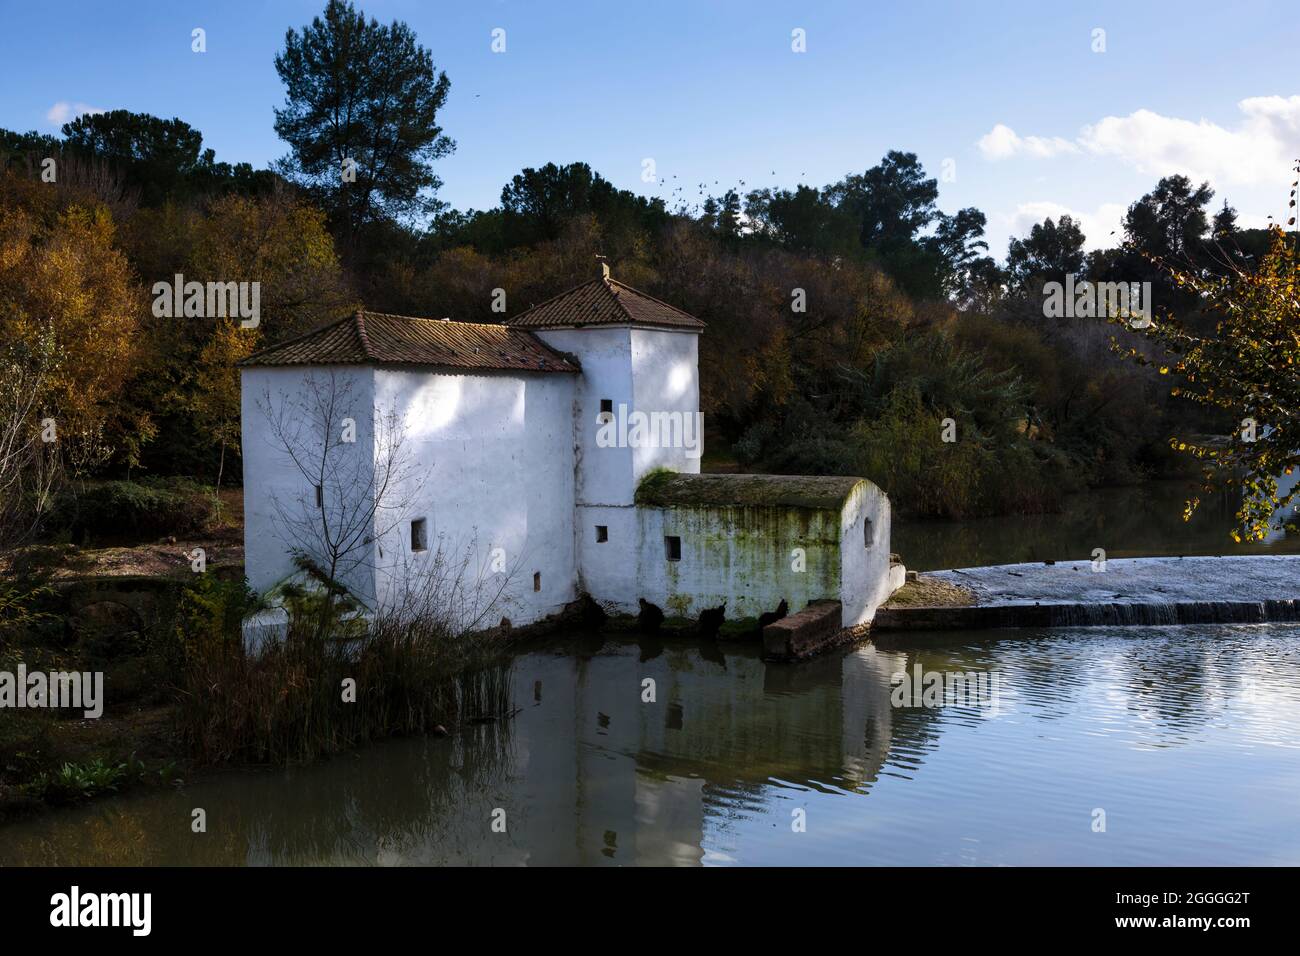 Rural scene of an old water mill in a sunny autumnal day Stock Photo